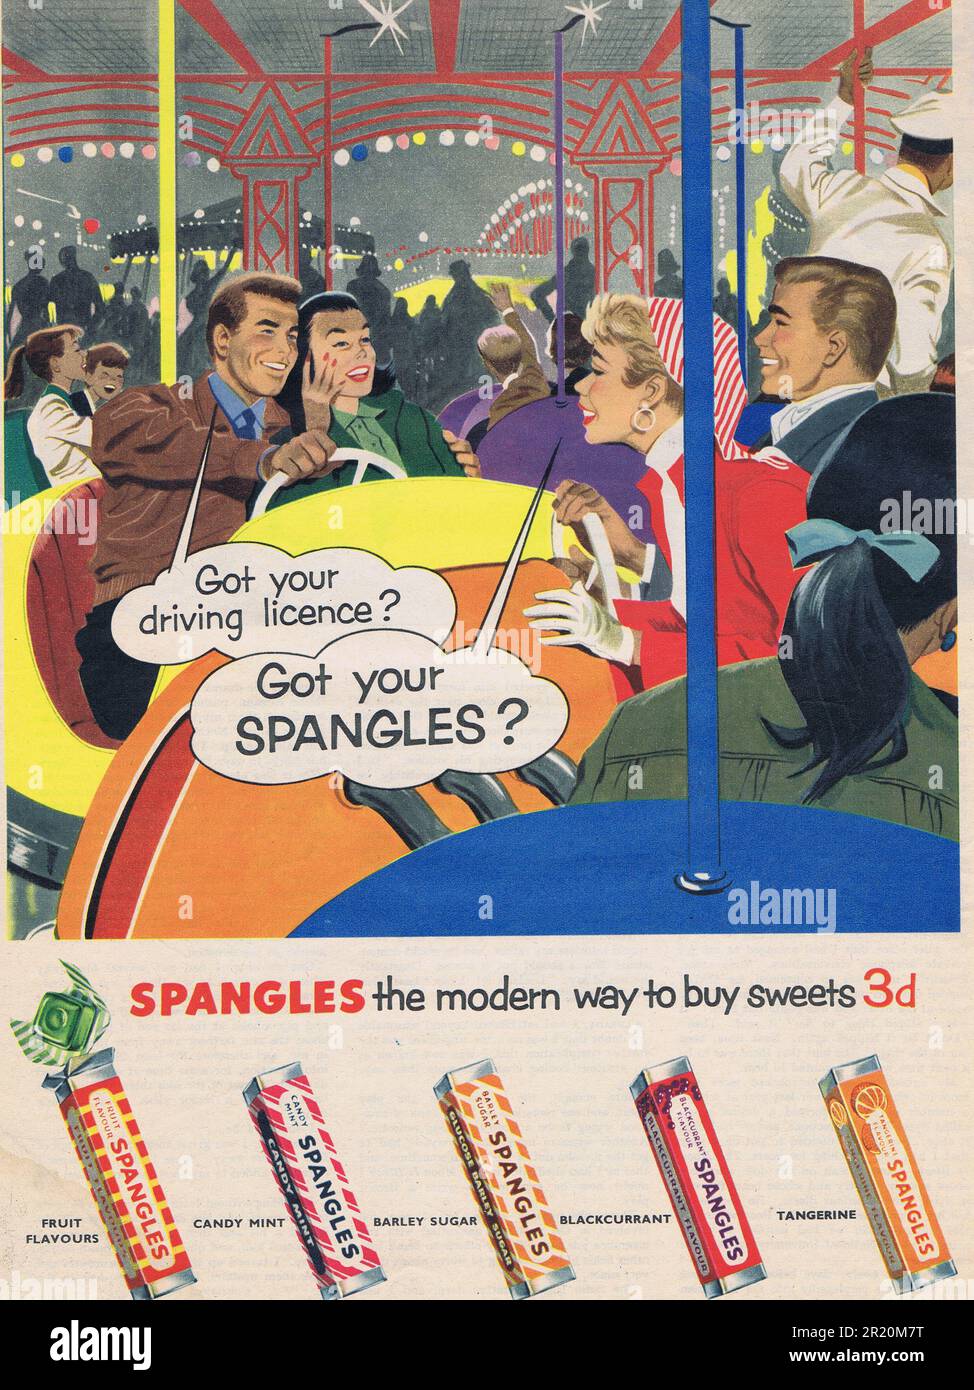 Spangles Ad c1955 Photograph by Hector Archive Stock Photo